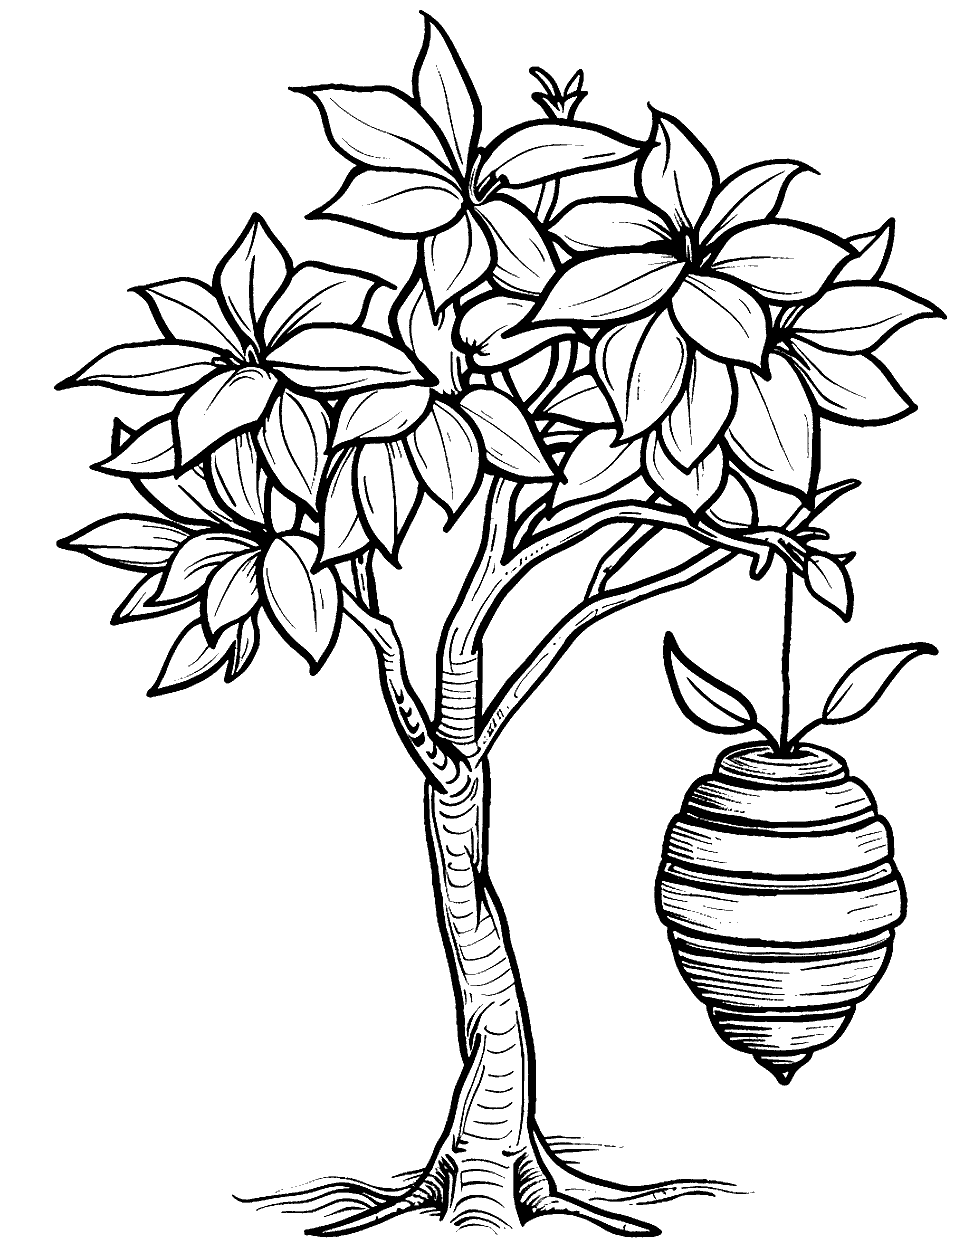 Beehive in an Tree Coloring Page - A beehive hanging from a branch of a tree.